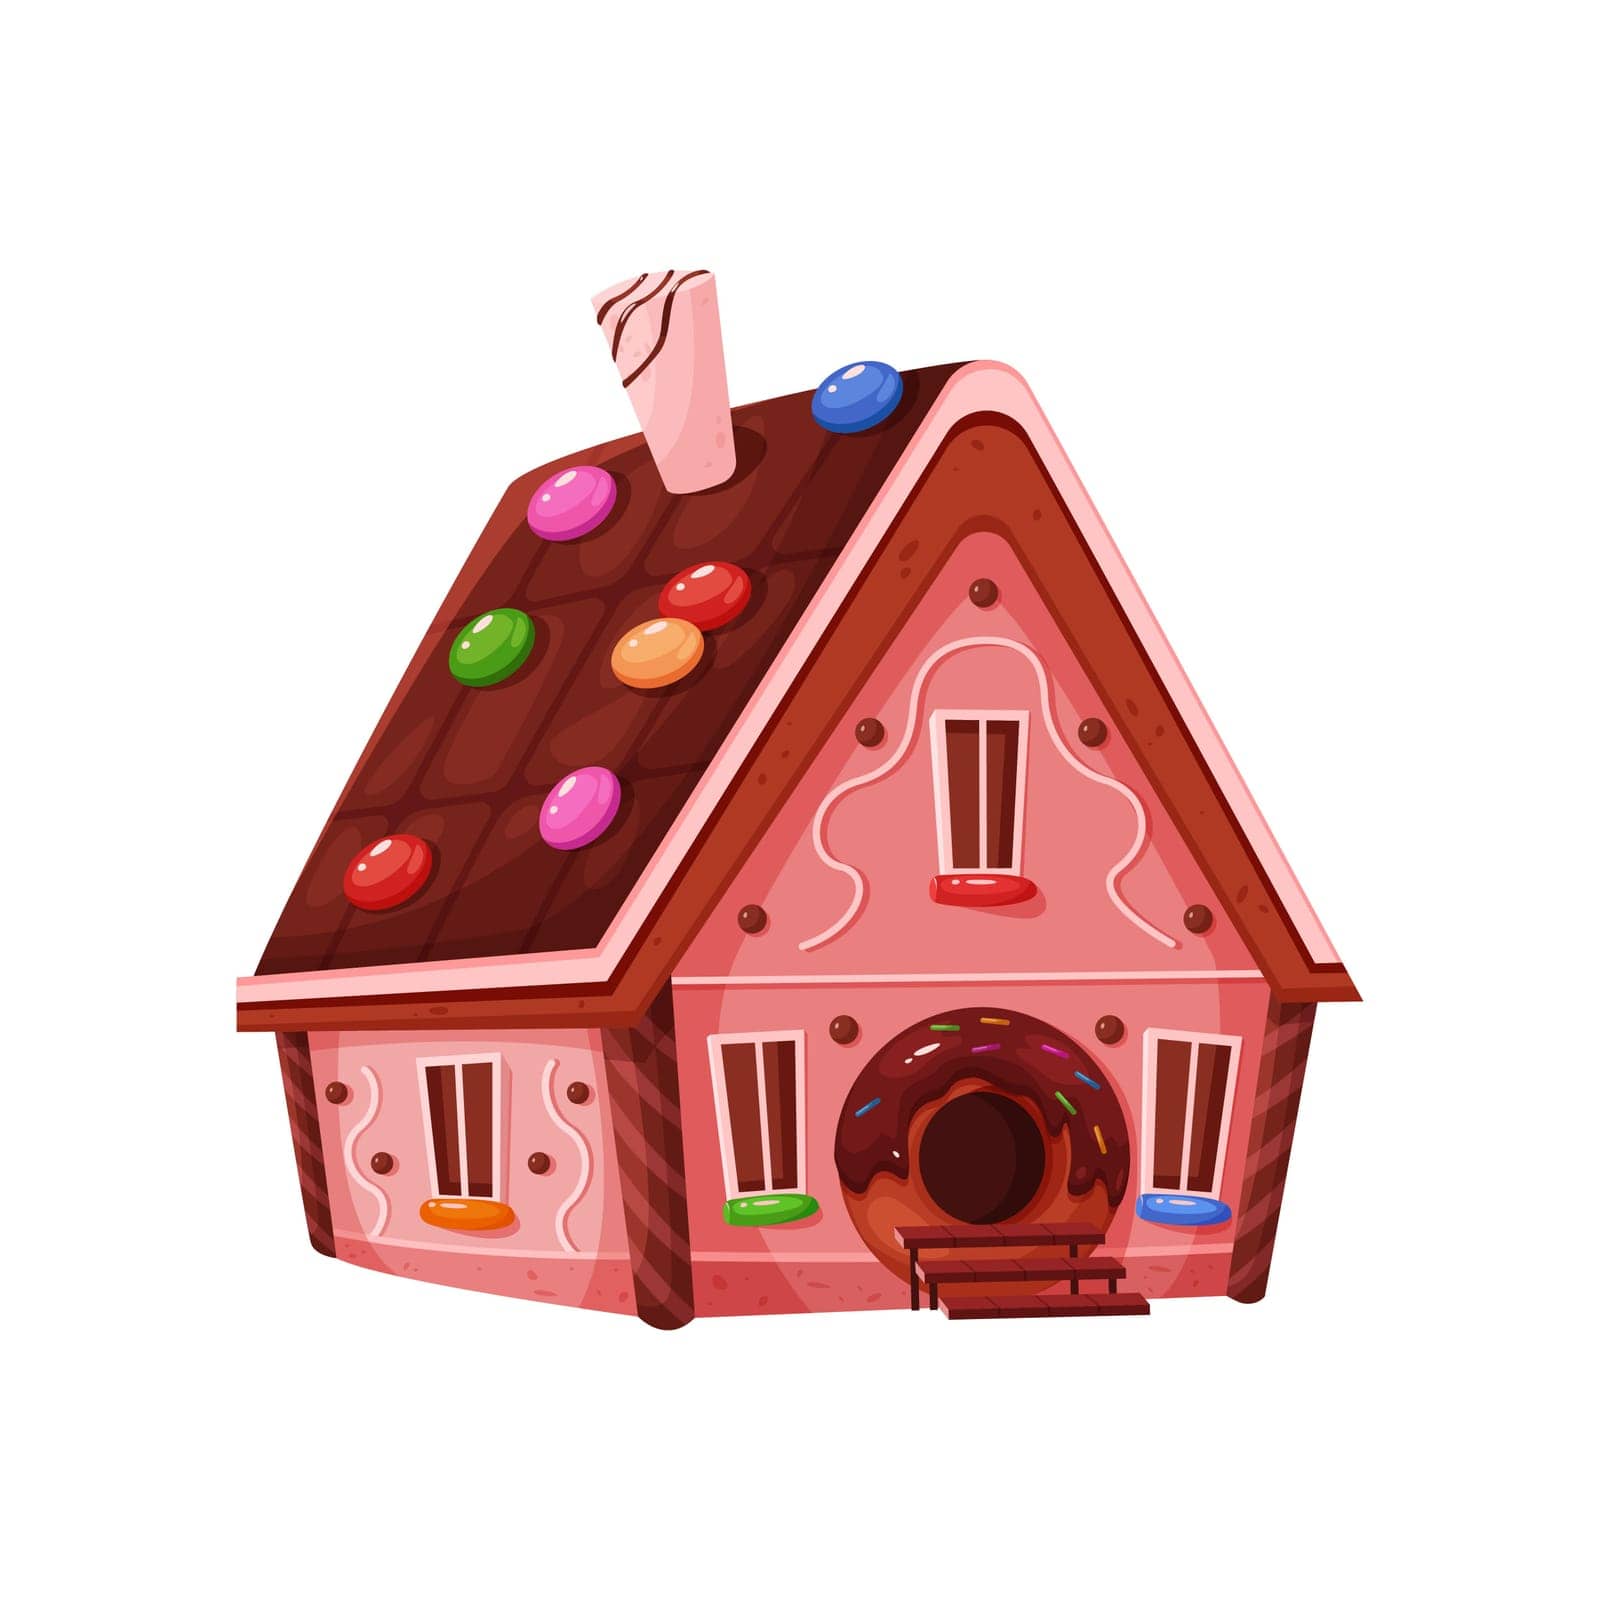 Fairy candy home. Gingerbread house, pastry product, creative dessert cartoon vector illustration